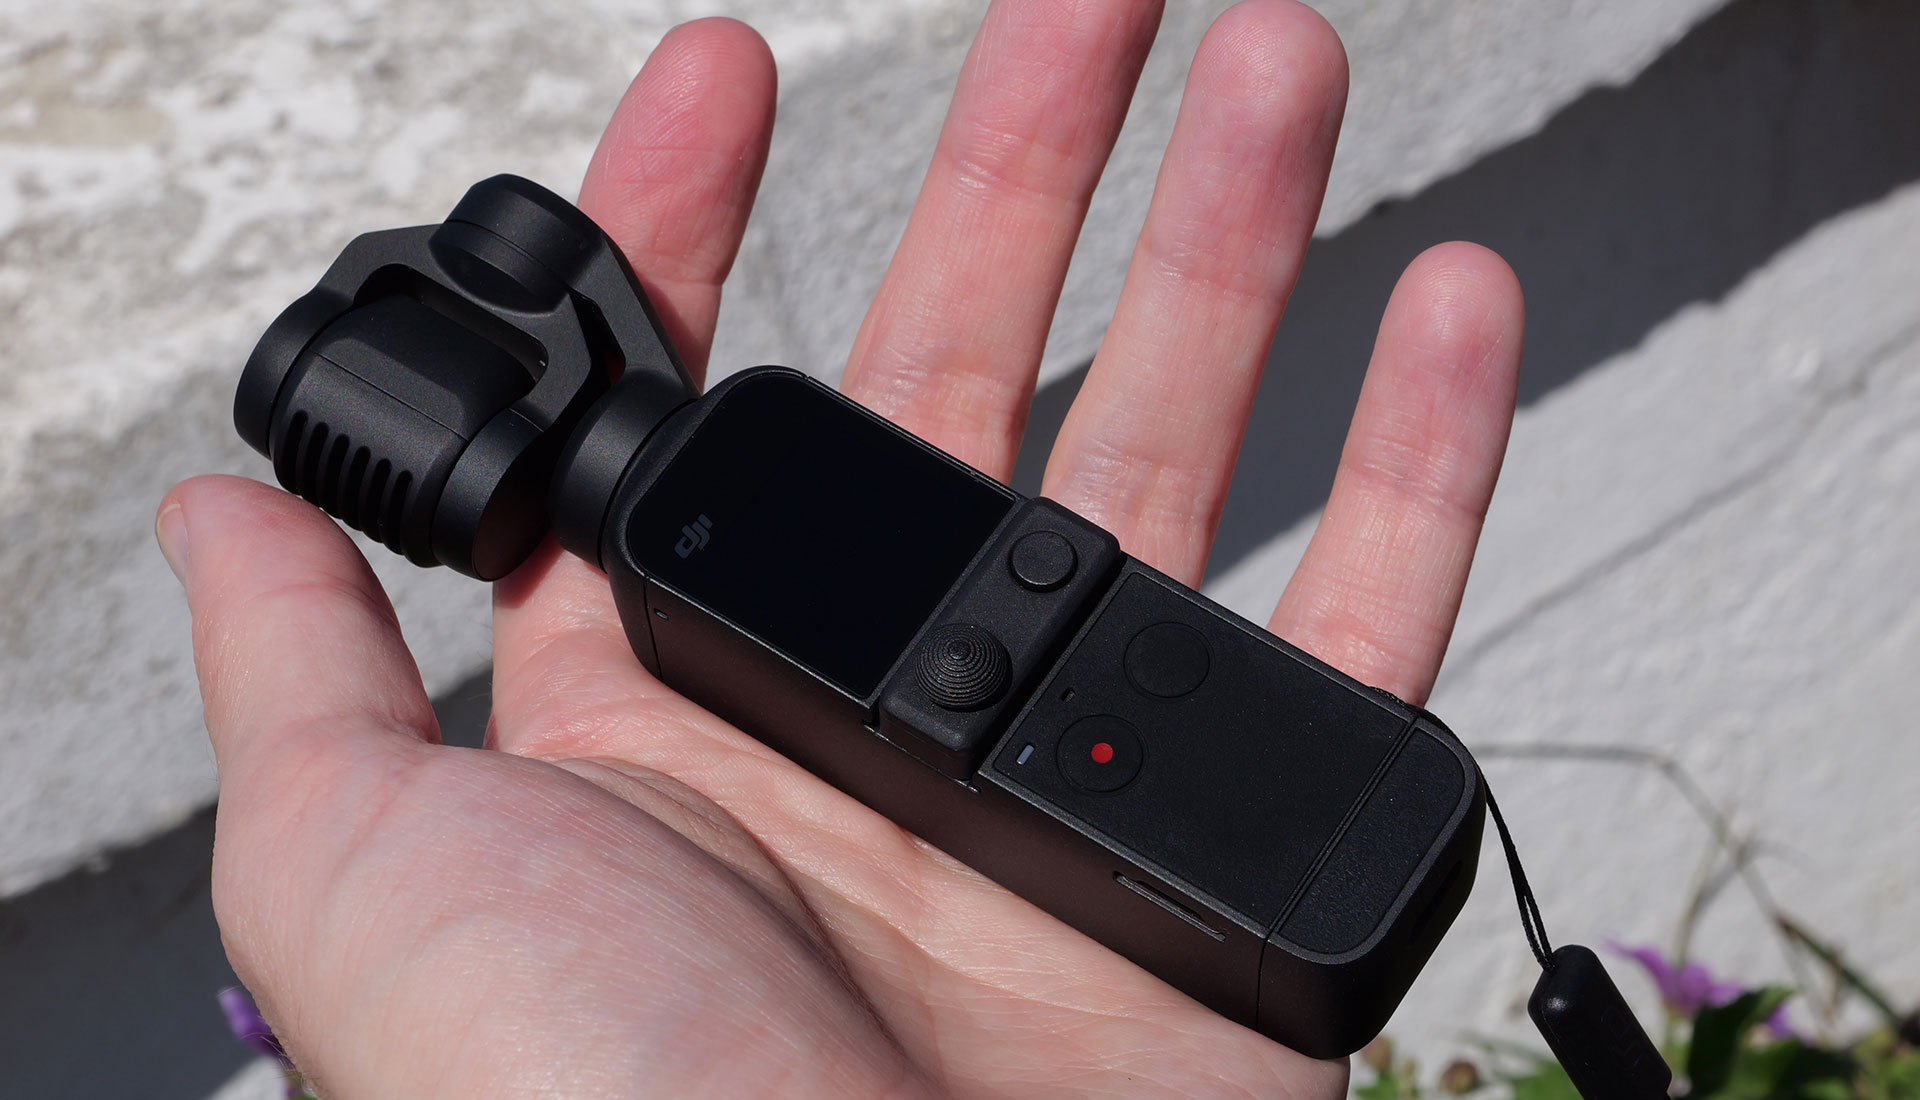 Review: The DJI Pocket 2 is a fantastic portable camera for vloggers